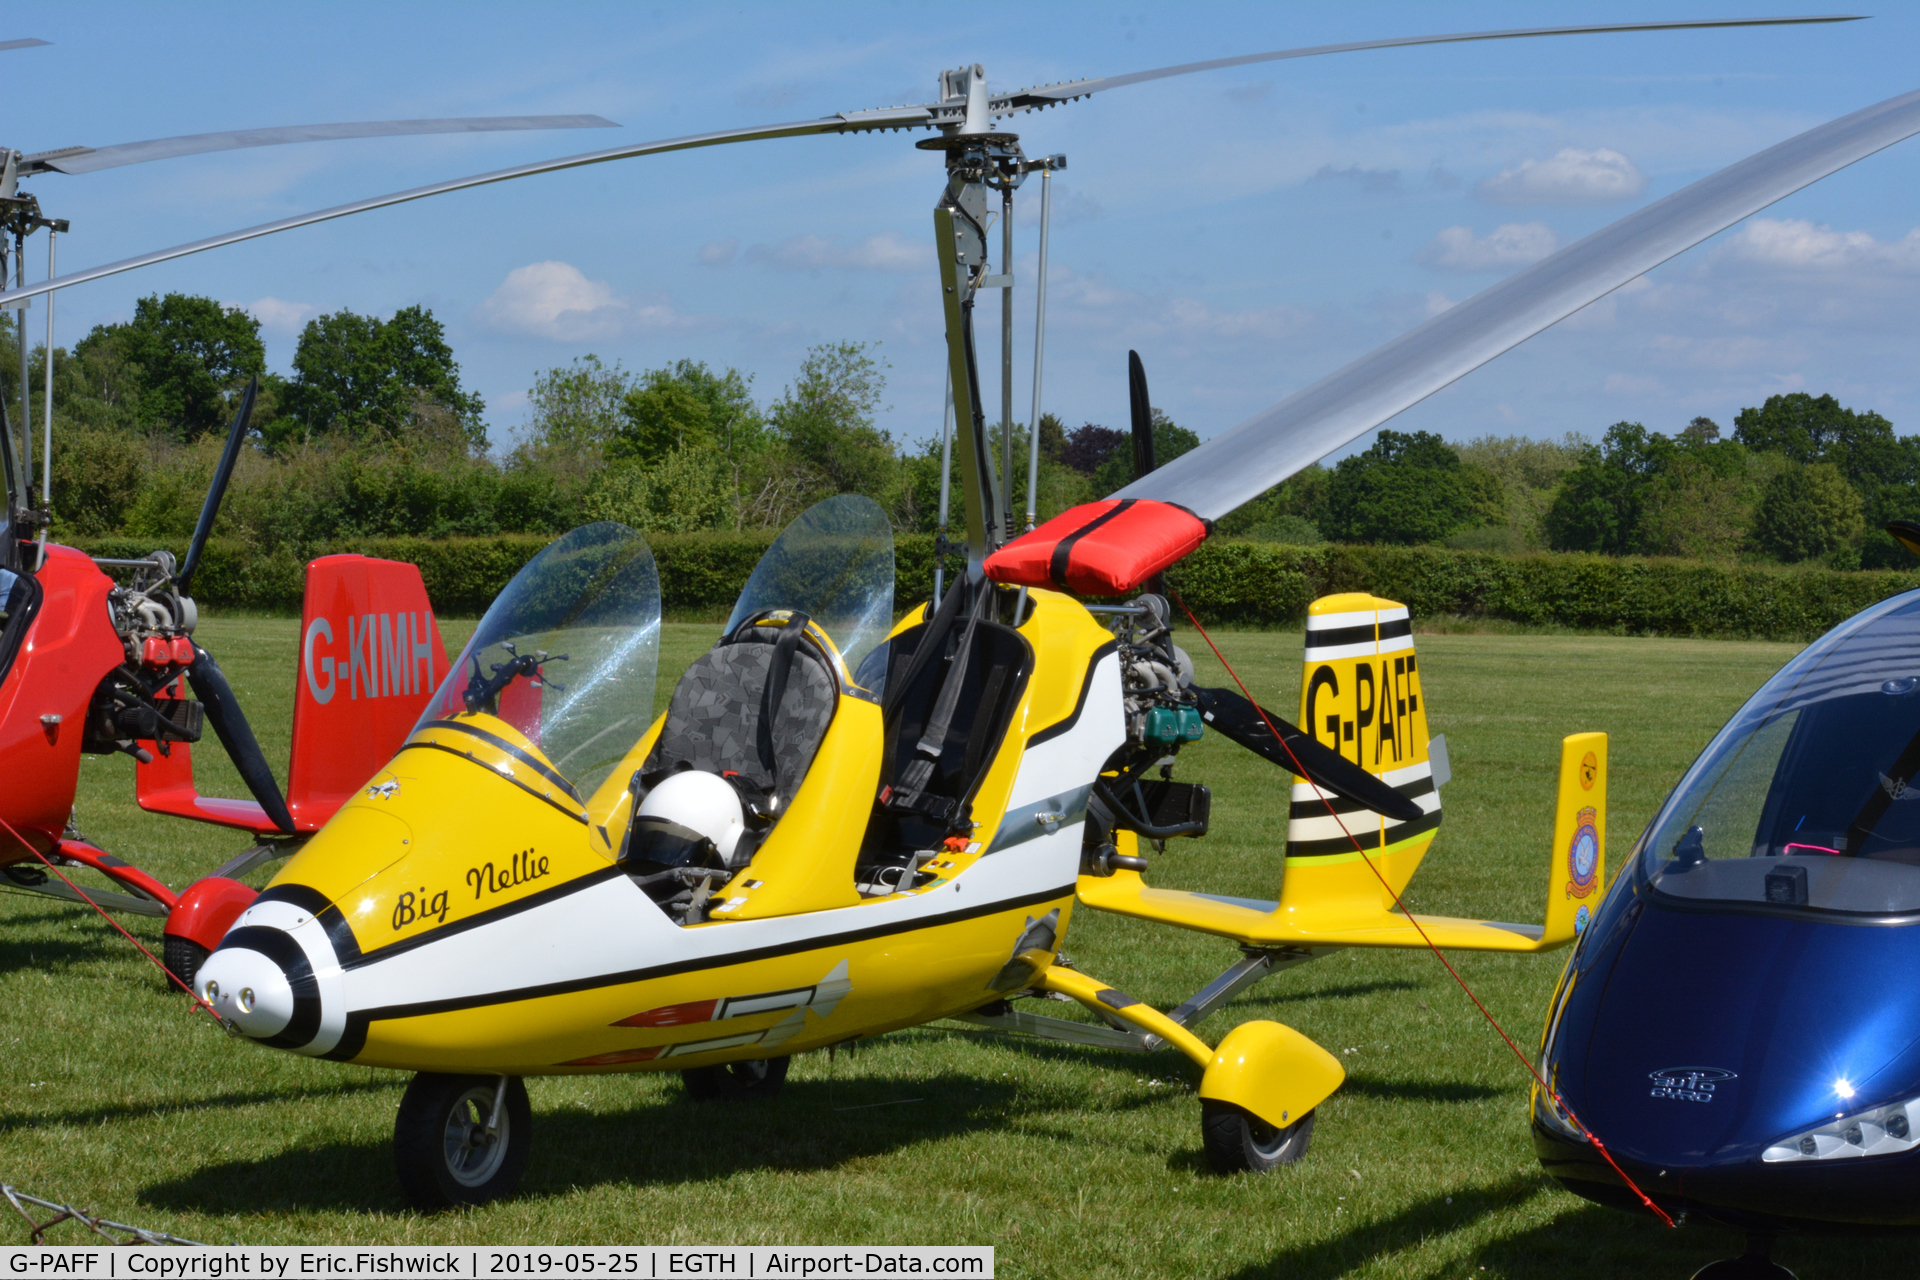 G-PAFF, 2011 Rotorsport UK MTOsport C/N RSUK/MTOS/039, 3. G-PAFF at the British Rotor Association annual gathering at the Shuttleworth Collection, May. 2019.